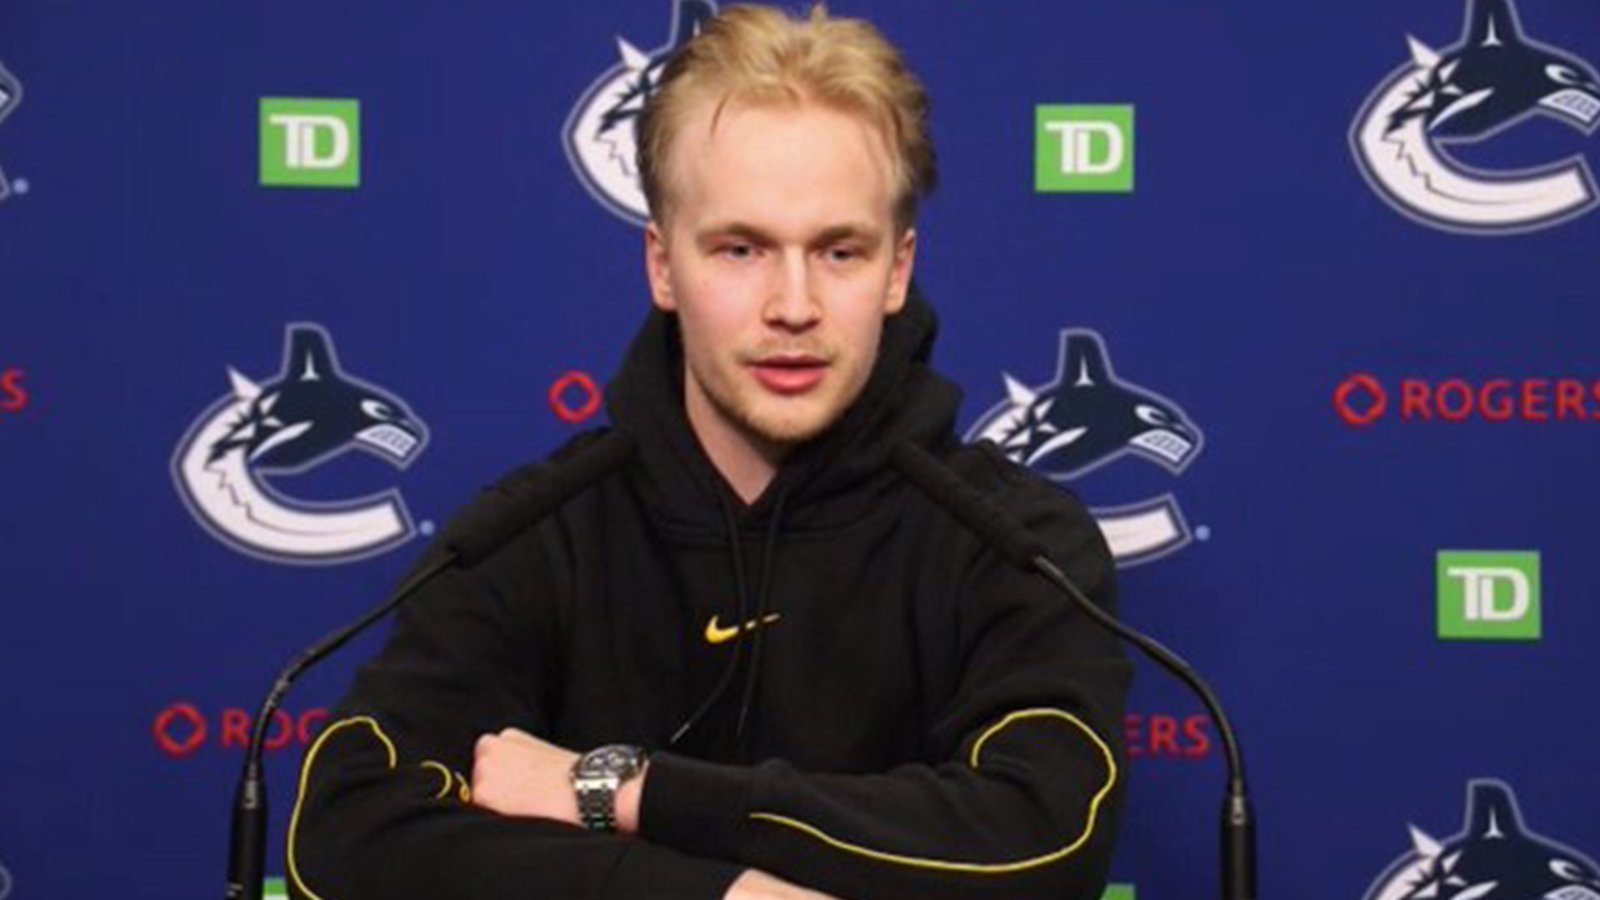 Pettersson discloses his injury, talks about contract negotiations and potentially “playing elsewhere”